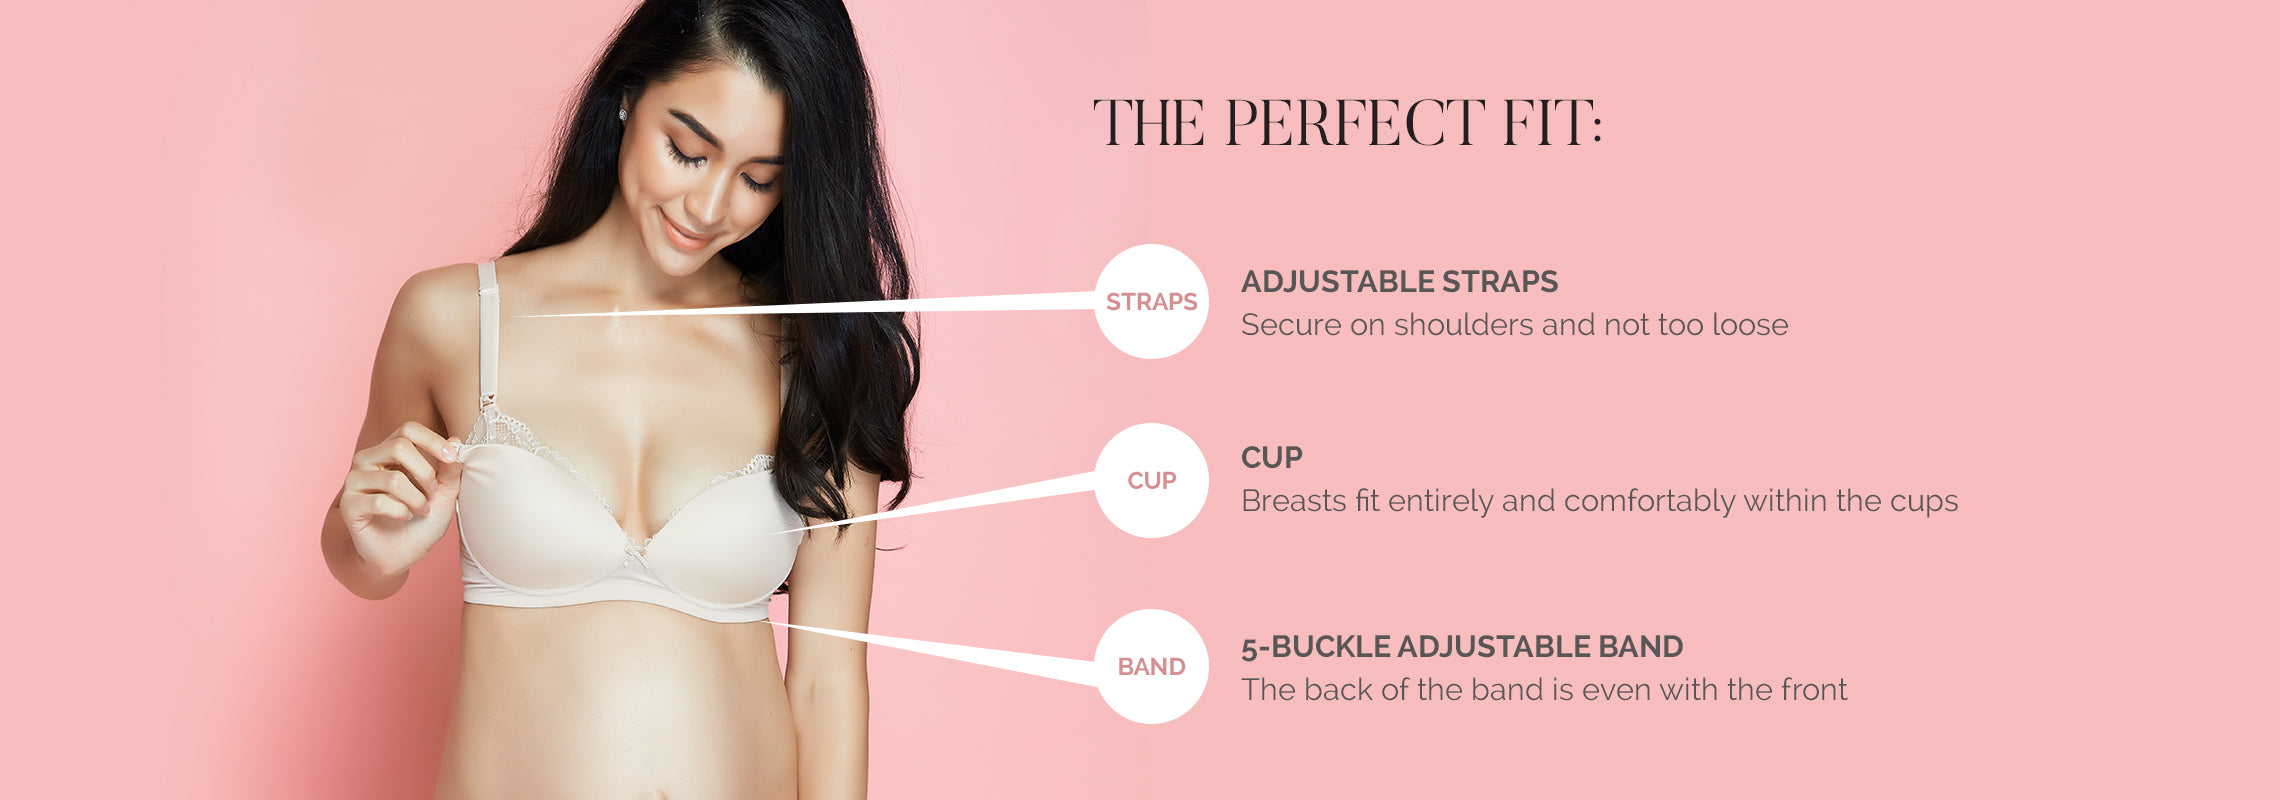 How to Measure Your Breast Size - Bra Size Converter